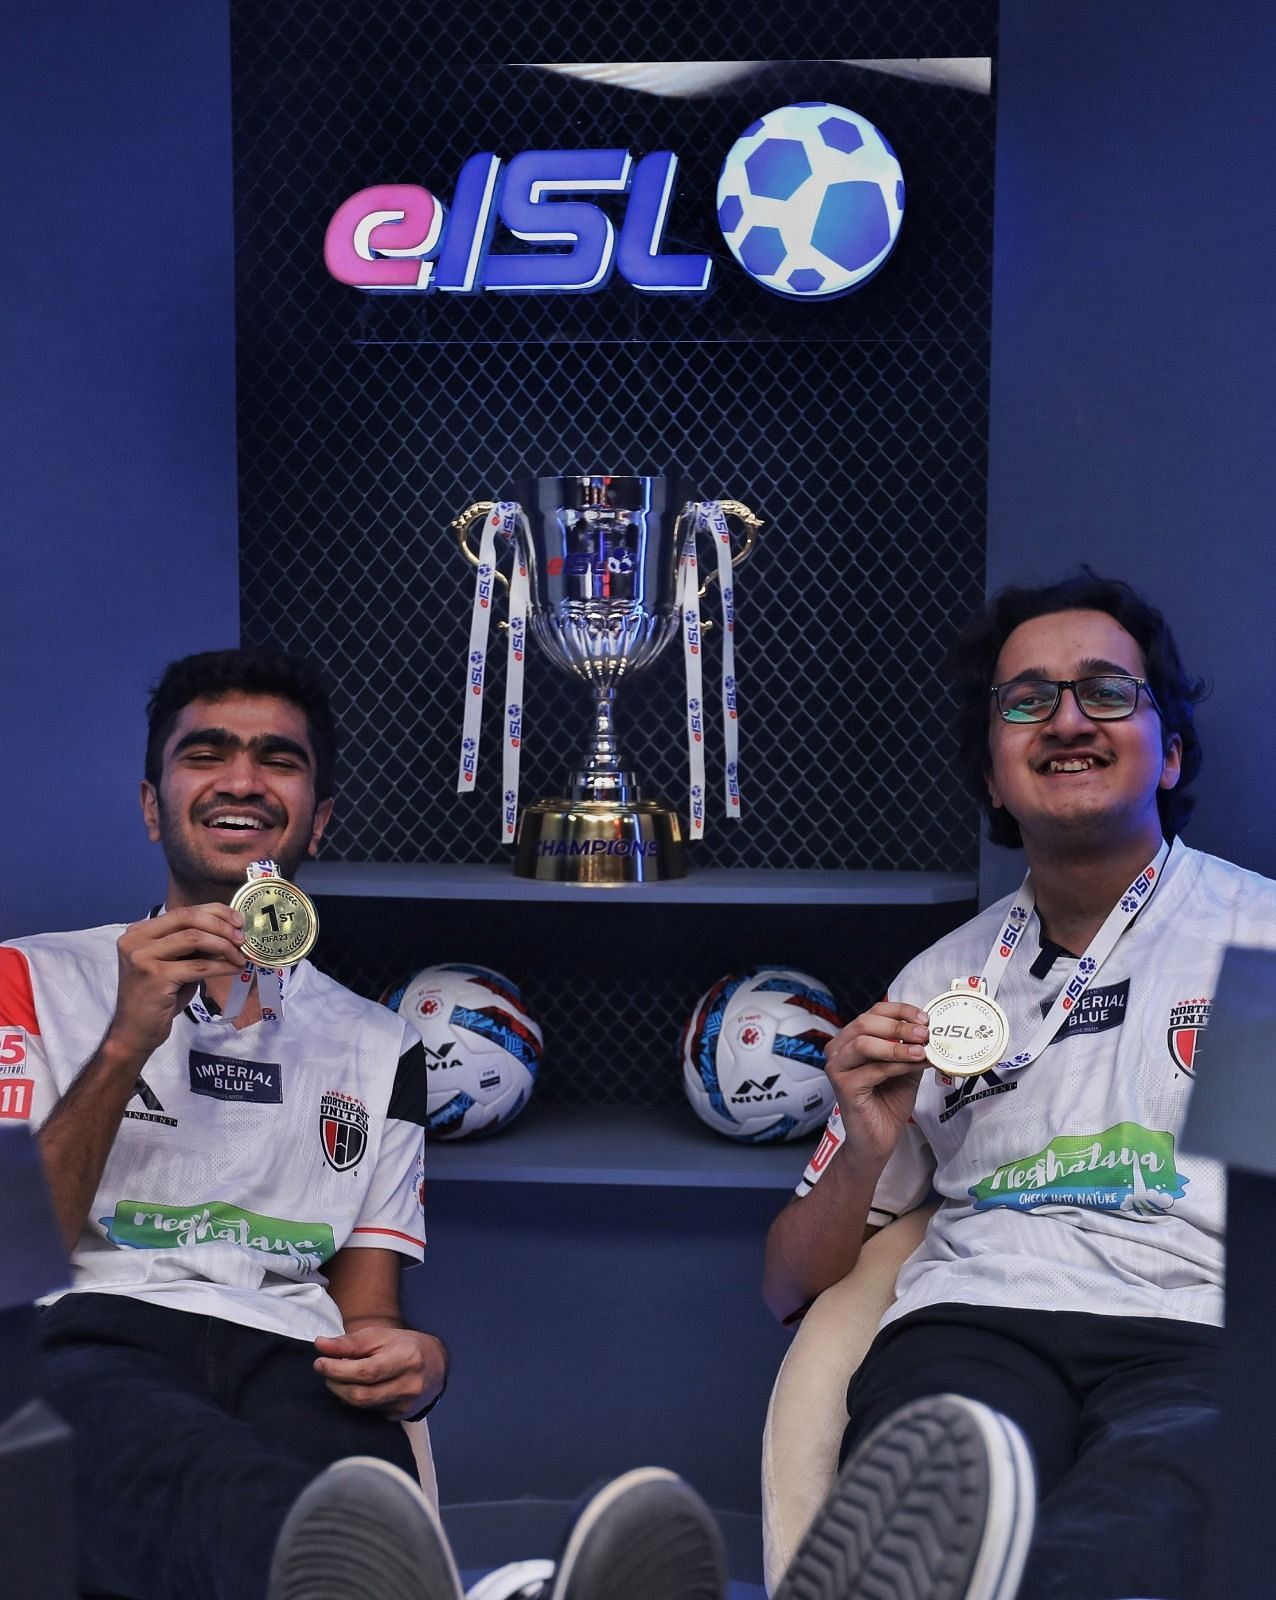 Saransh and Emaad basking in the glory after beating Bengaluru FC 2-1 in the final (Image via @eislgaming on Instagram)